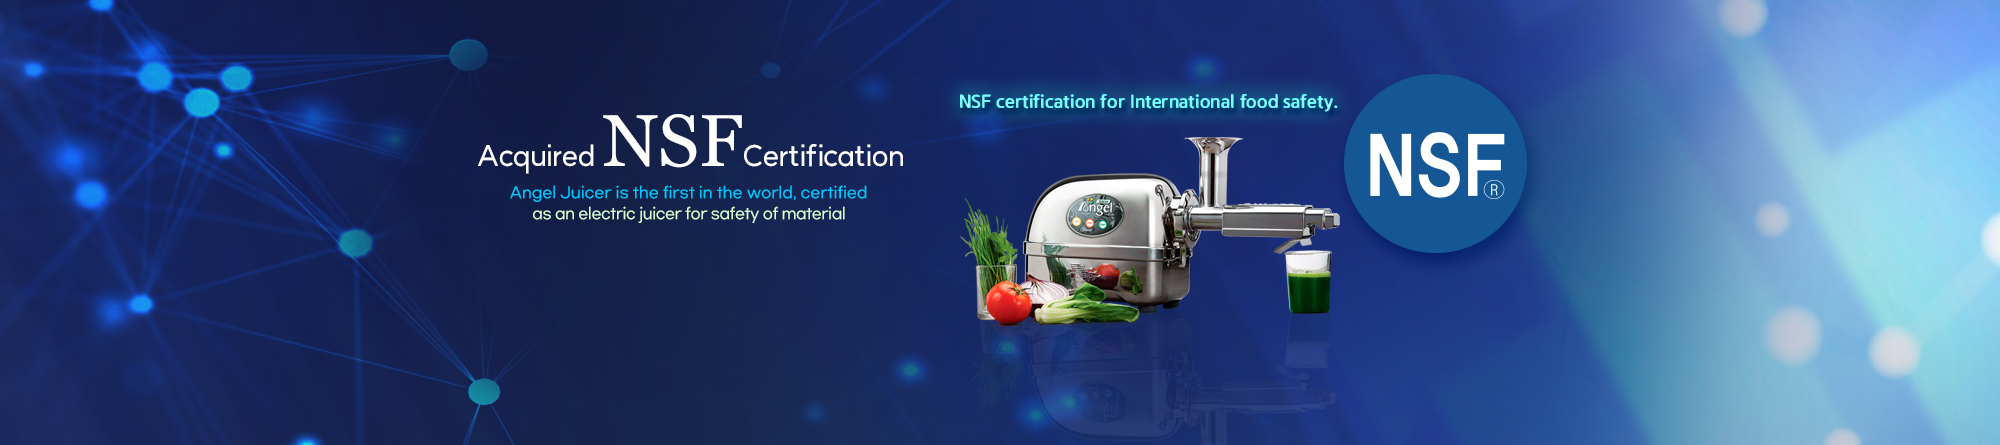 Obtained NSF Certification